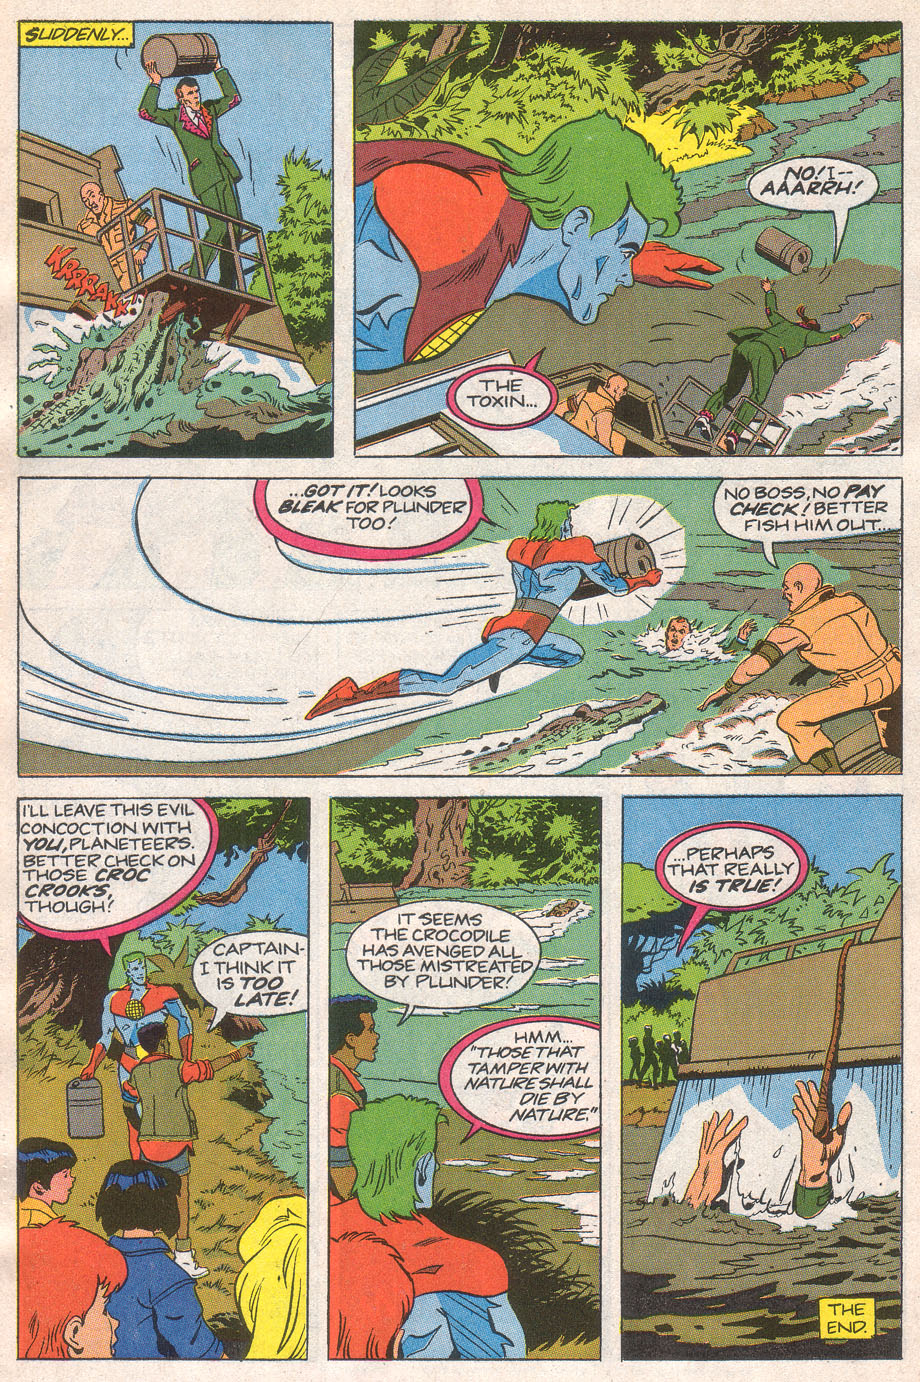 Captain Planet and the Planeteers 7 Page 31